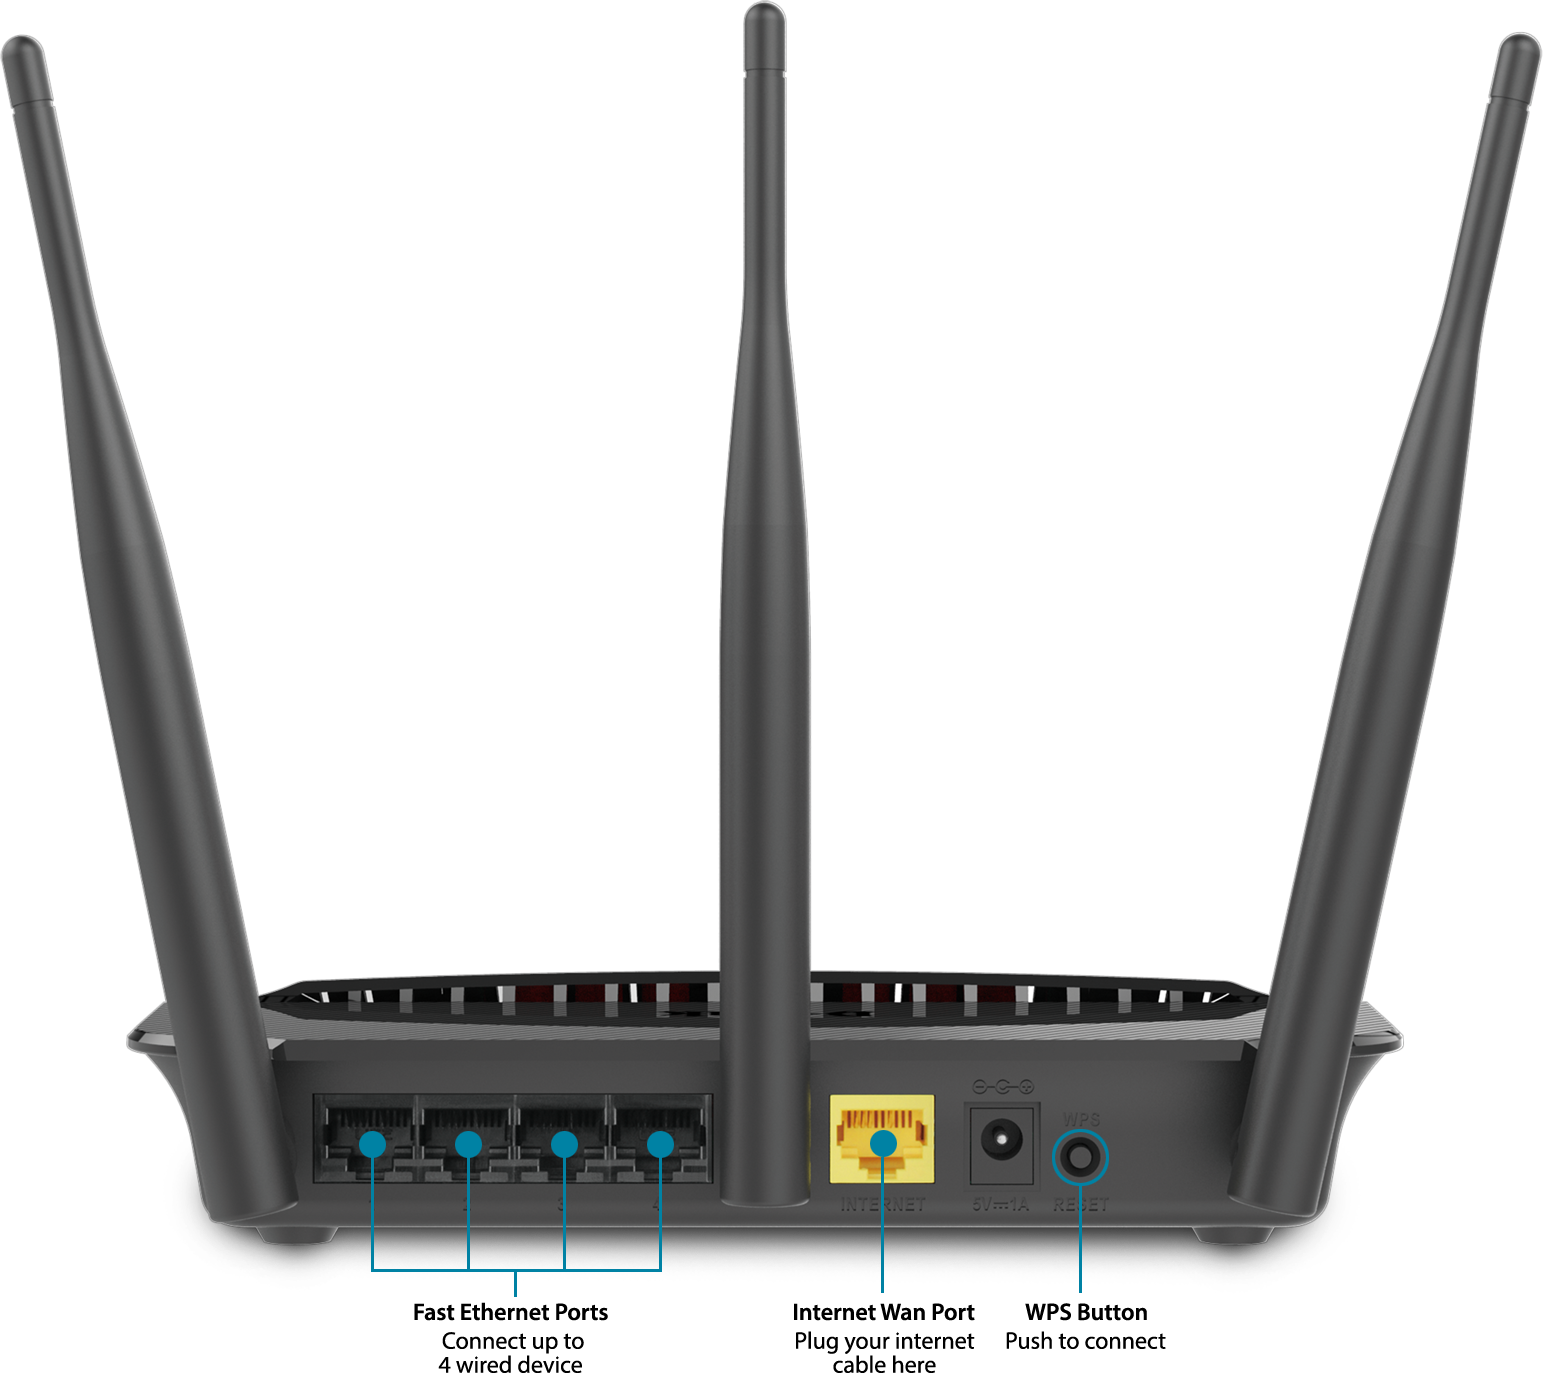 D-link 802.11 n wlan drivers for mac